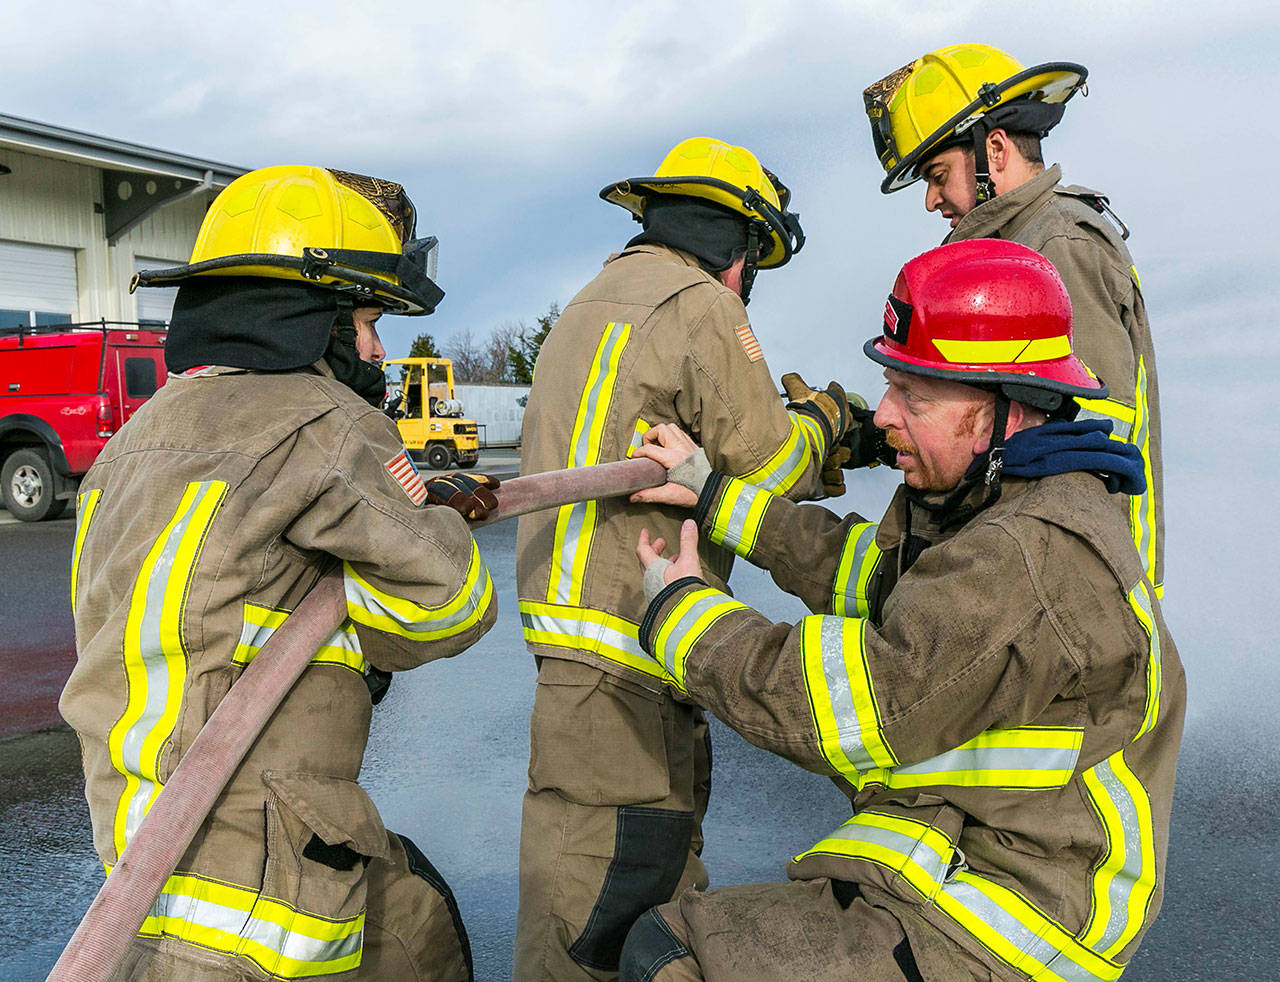 Marc Lawson, shift captain with Clallam County Fire District 3 (bottom right), helps fellow firefighters in a training exercise at the district’s training center in Carlsborg. The fire district is asking voters to approve a “levy lid lift” in the Nov. 6 general election. Photo by Linda Barnfather